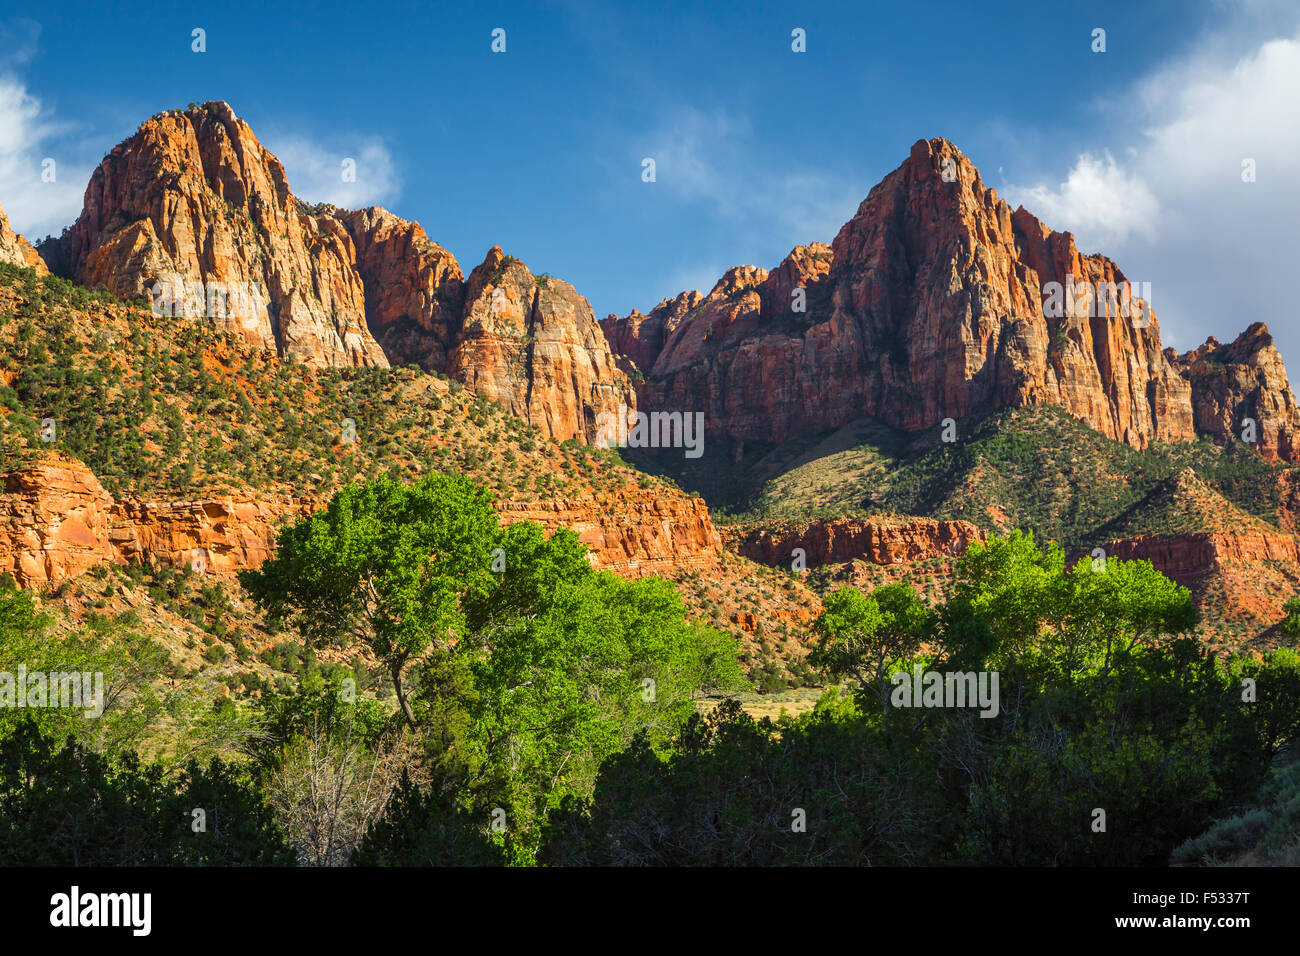 Mountains, buttes and valleys in Zion National Park, Utah, USA. Stock Photo